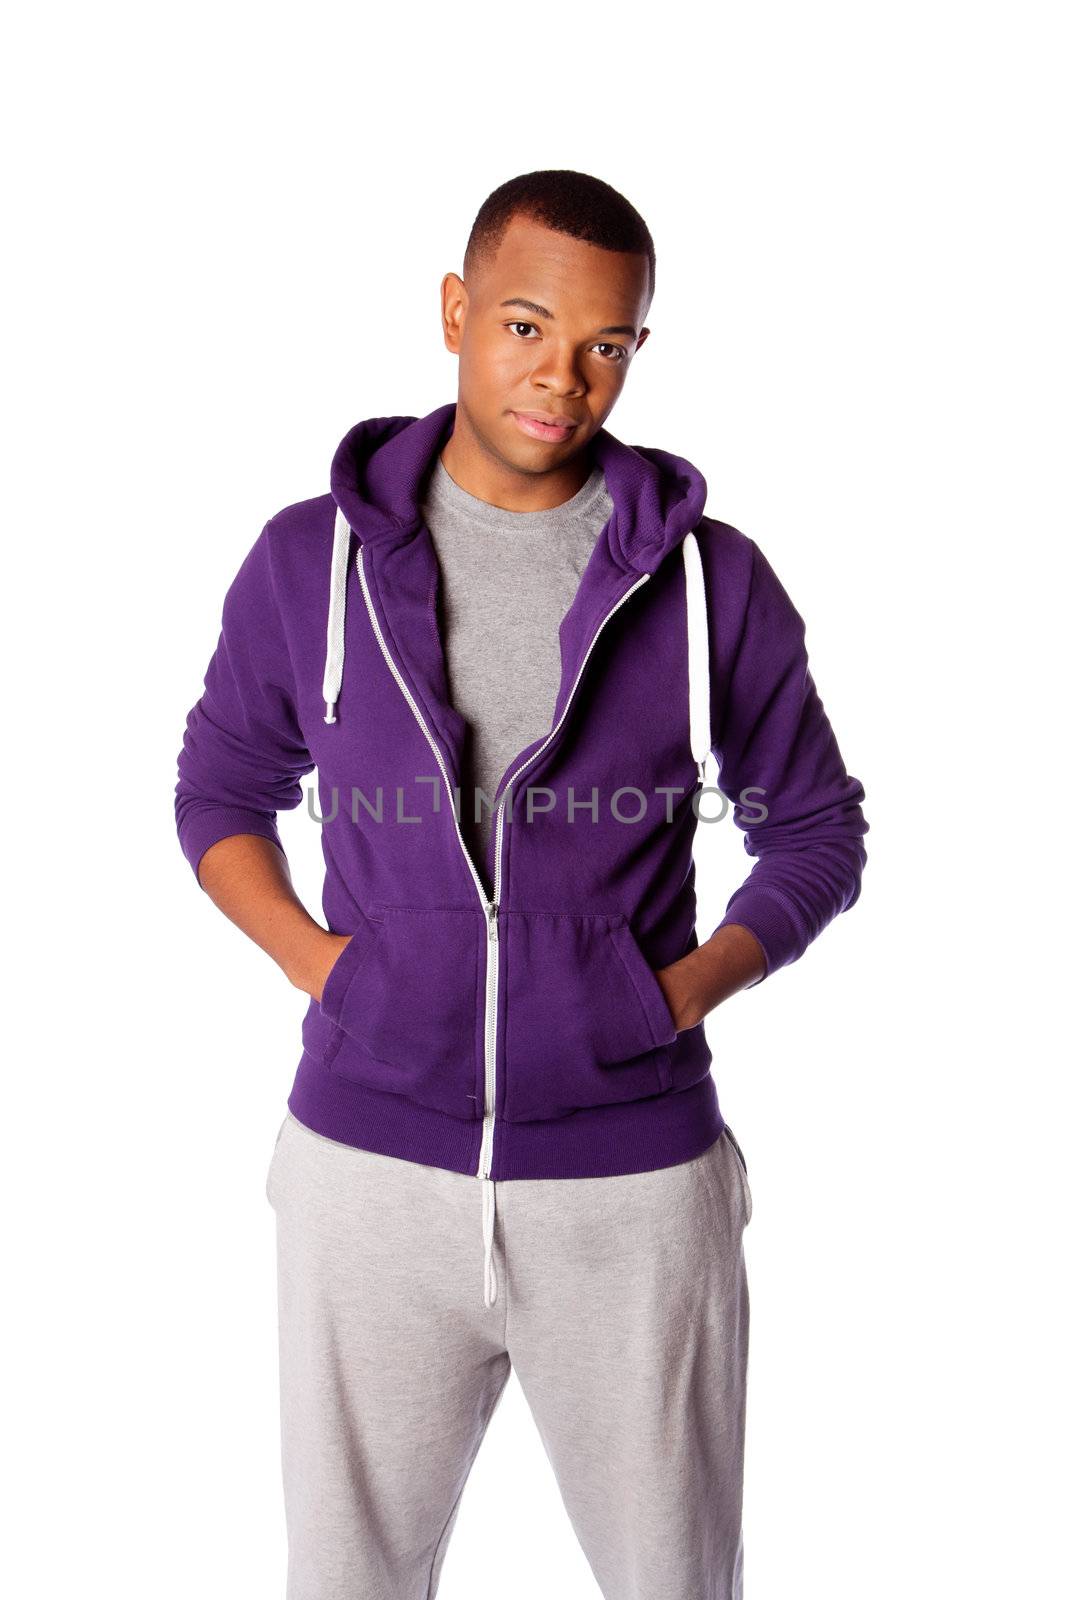 Young handsome man ready for sports wearing purple hooded sweatshirt and gray training pants, isolated.